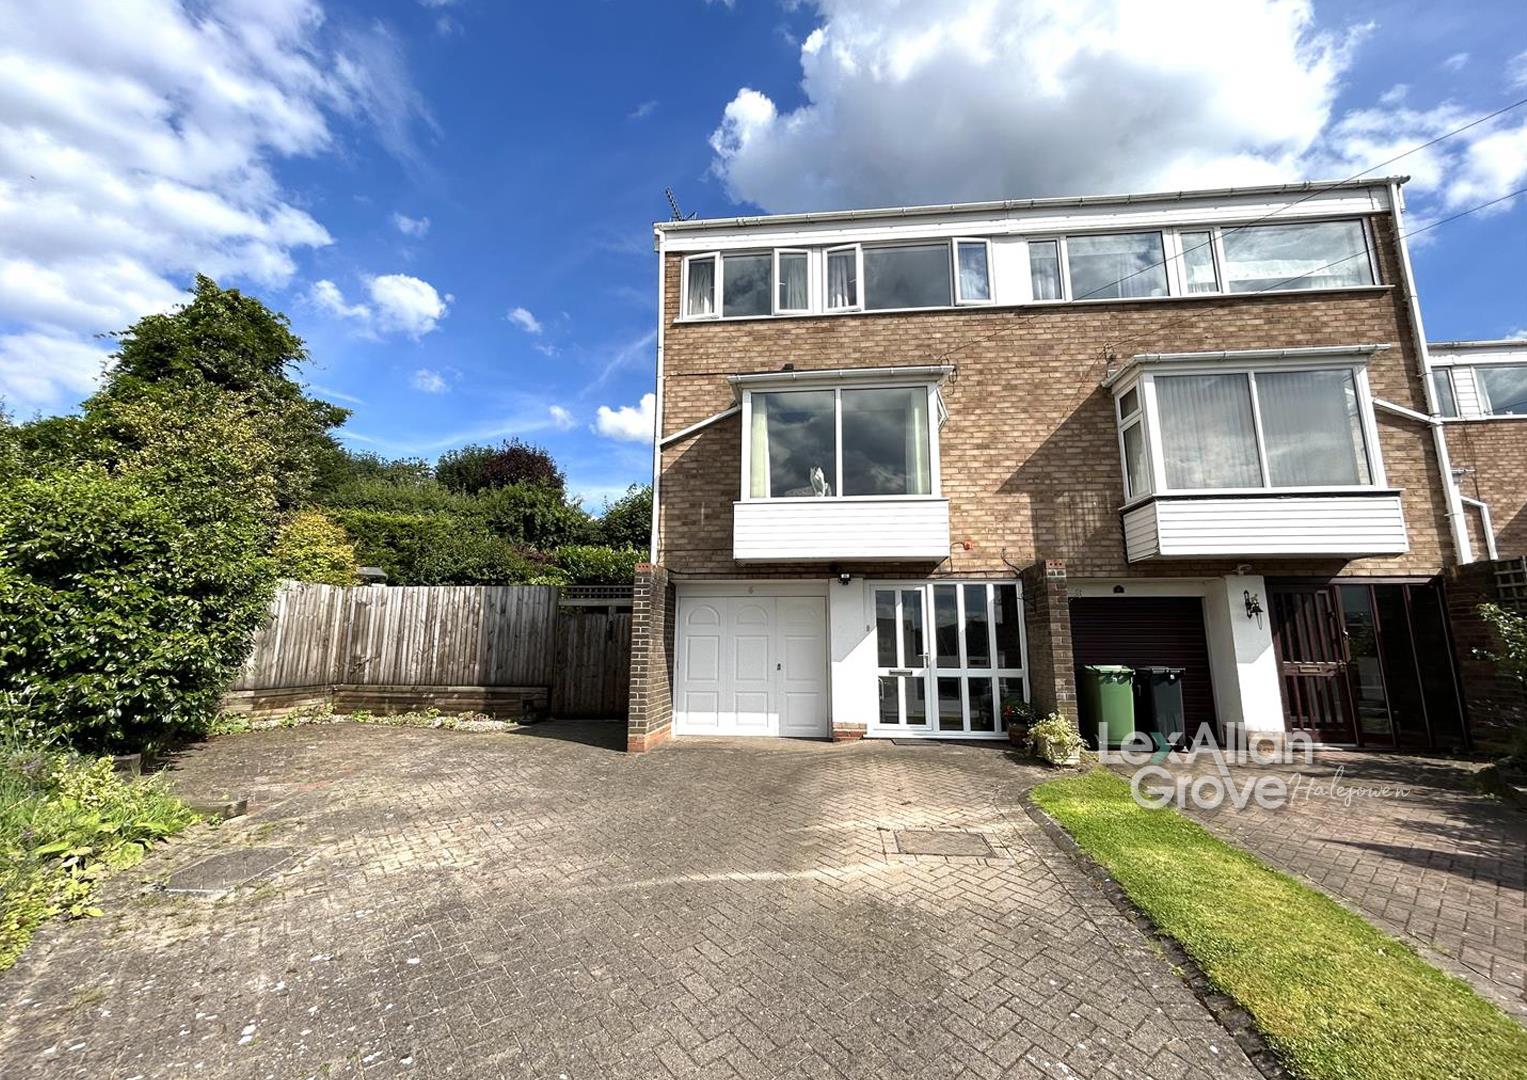 4 bed town house for sale in Abberton Close, Halesowen - Property Image 1